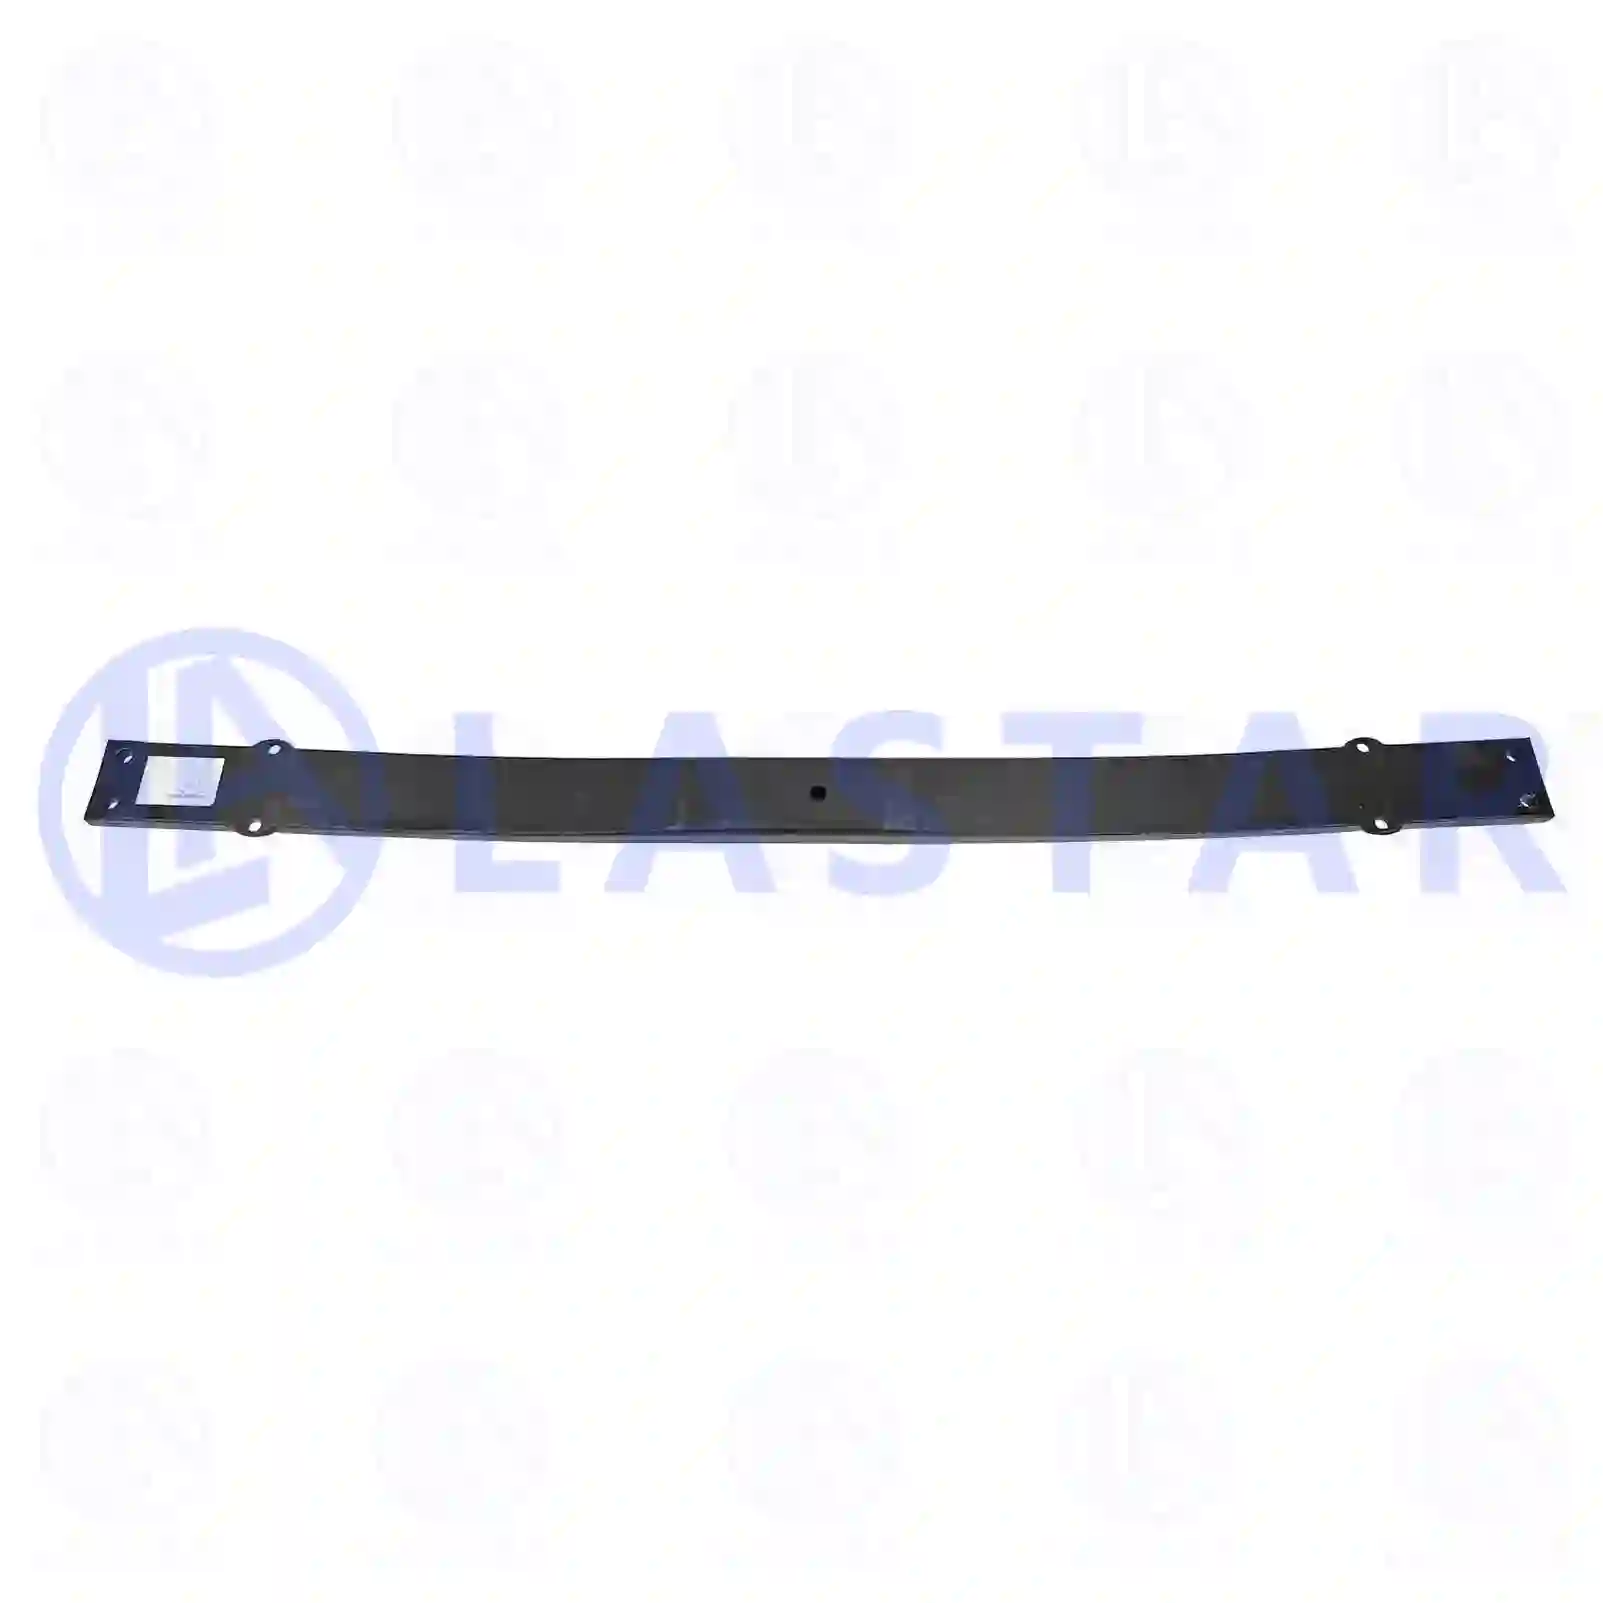 Leaf spring, 77728090, 9483202405S1, , ||  77728090 Lastar Spare Part | Truck Spare Parts, Auotomotive Spare Parts Leaf spring, 77728090, 9483202405S1, , ||  77728090 Lastar Spare Part | Truck Spare Parts, Auotomotive Spare Parts